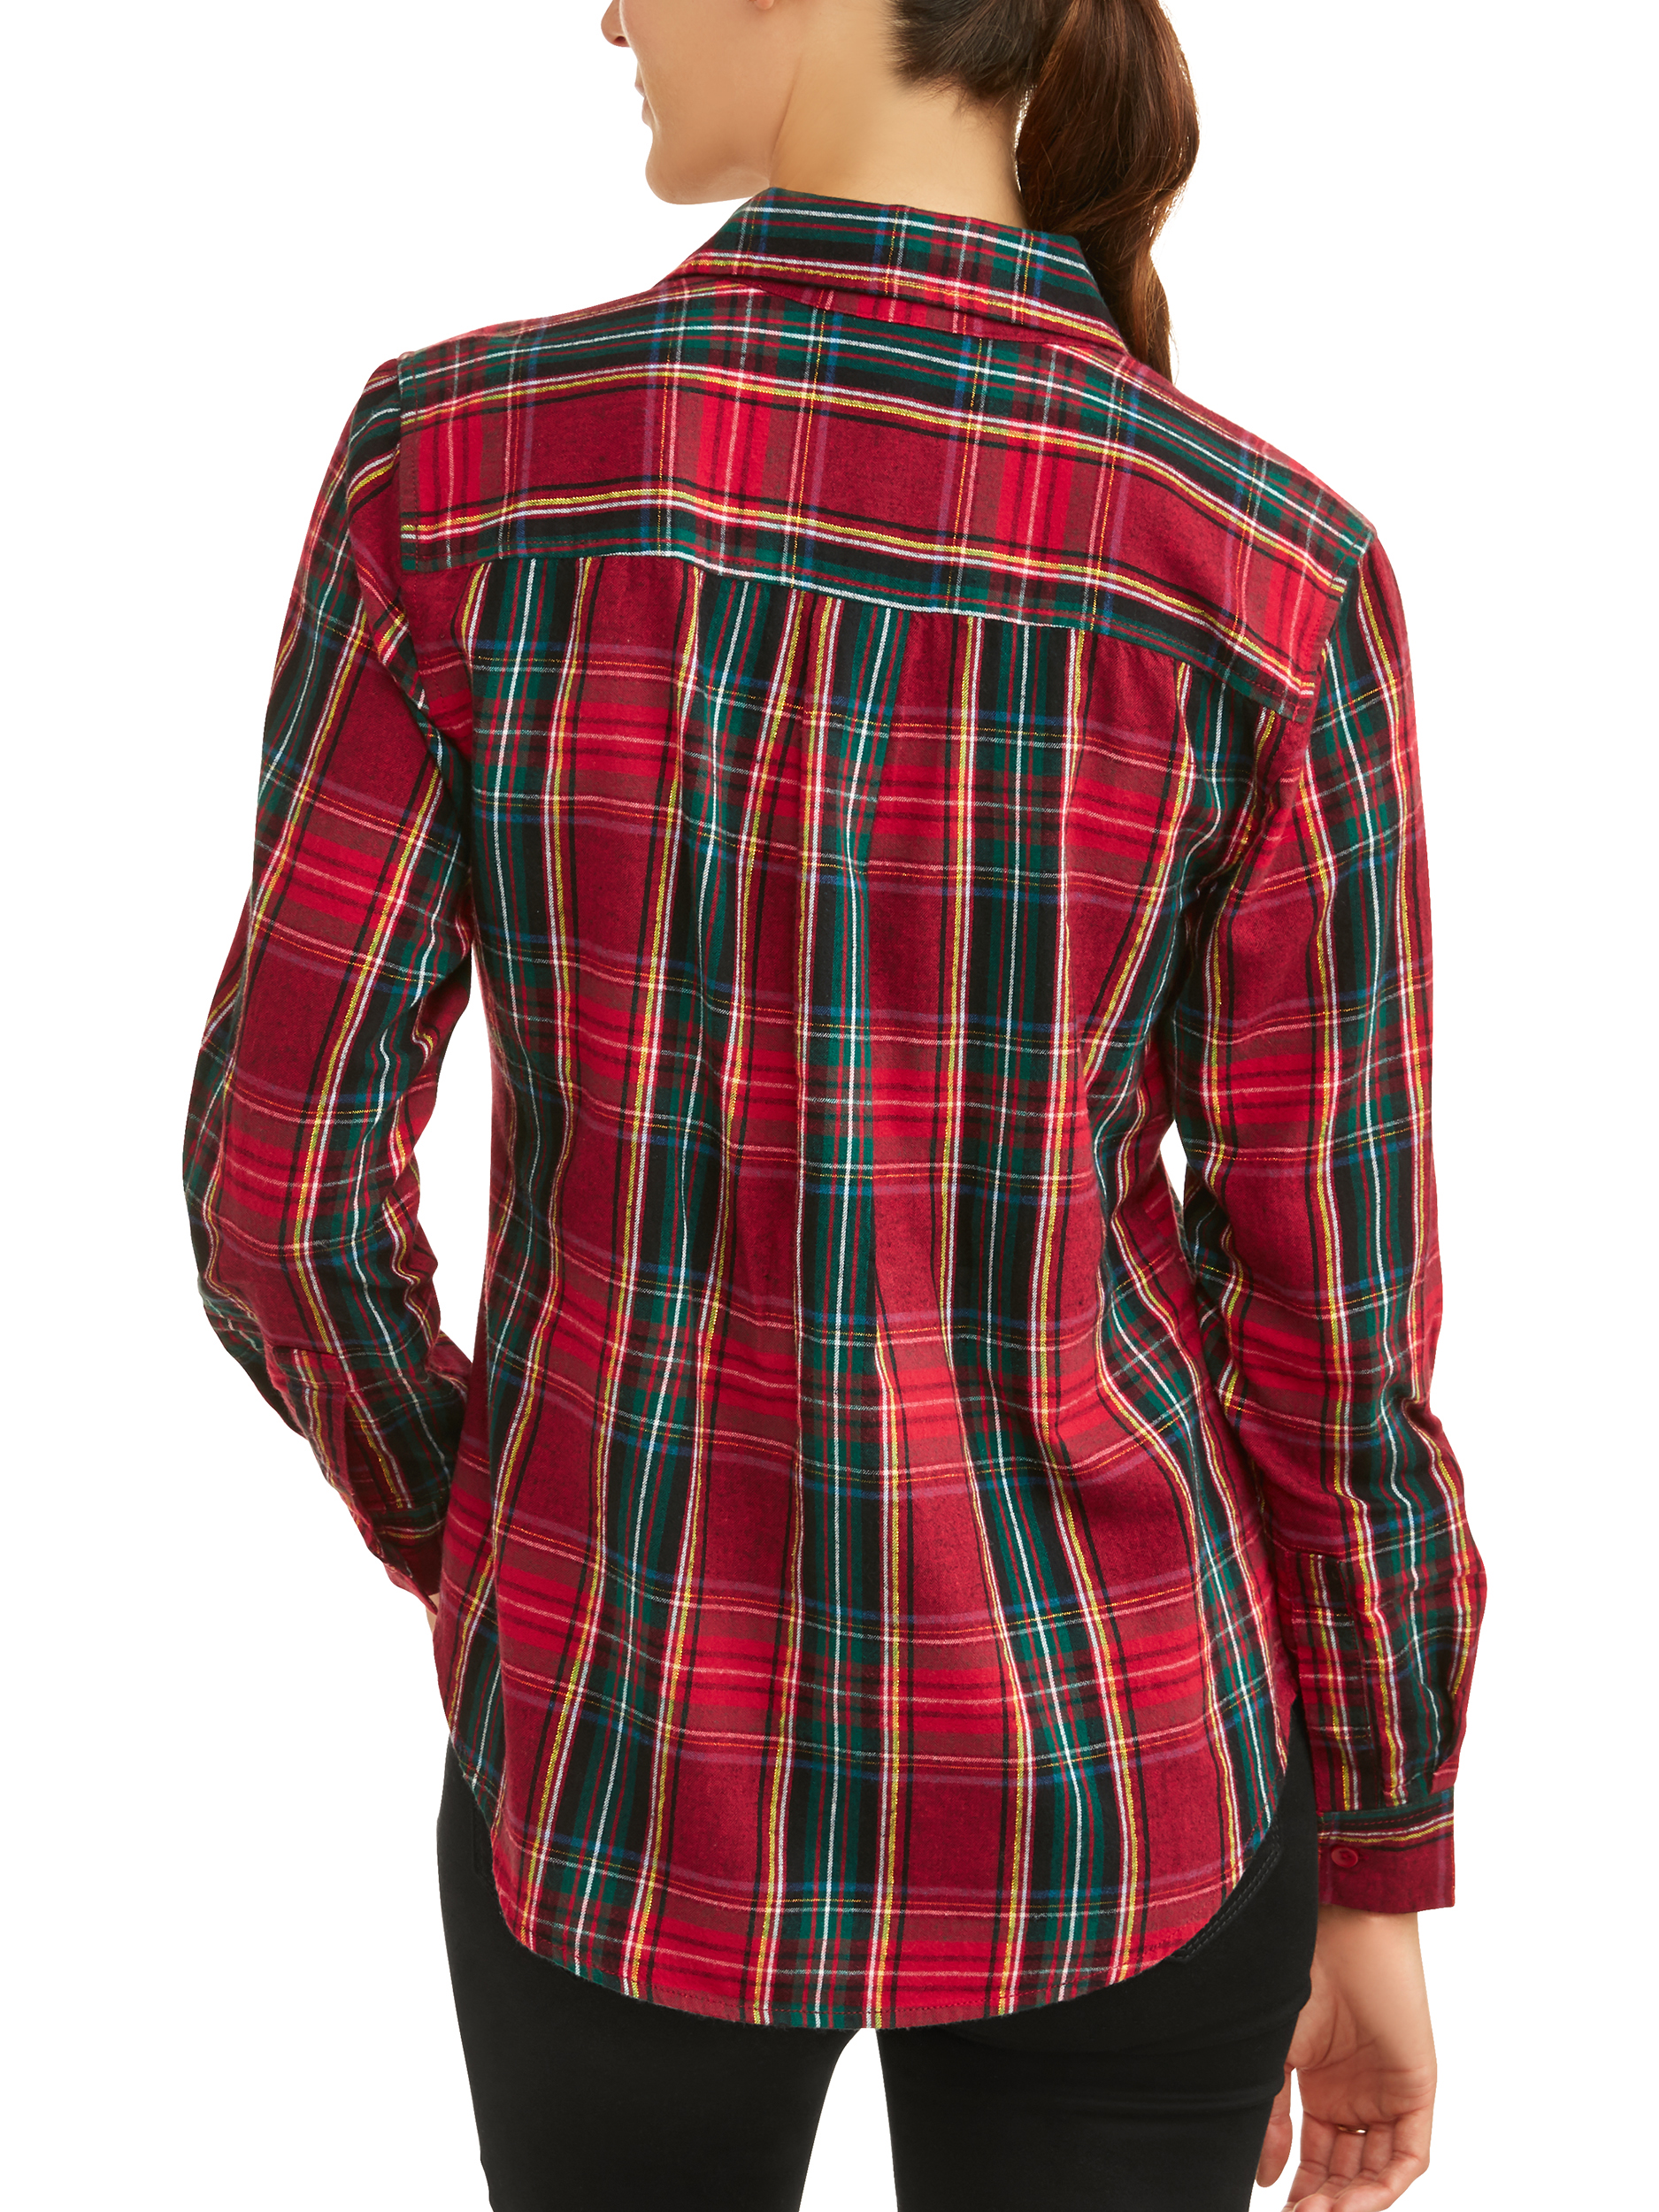 Time and Tru Women's Brushed Cotton Plaid Shirt - image 2 of 6